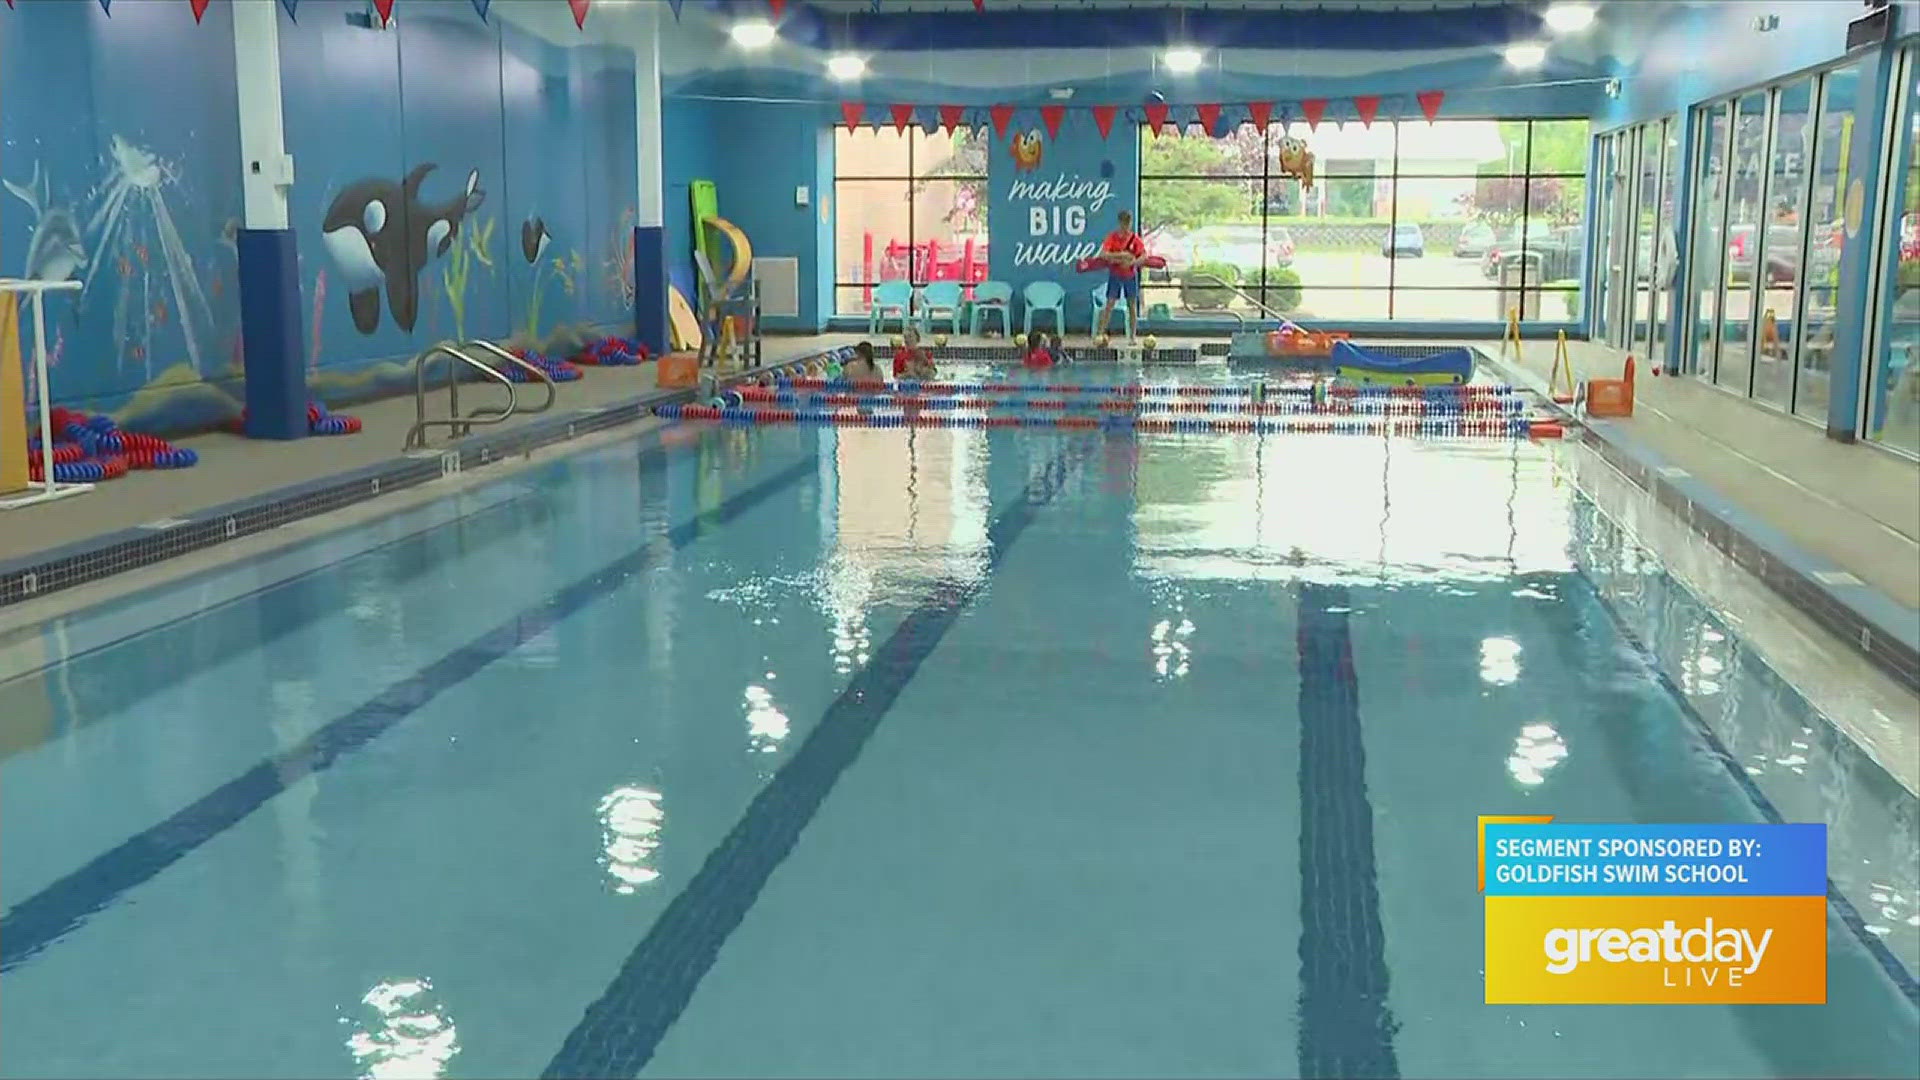 Goldfish Swim School gives parents water safety tips to protect their children.